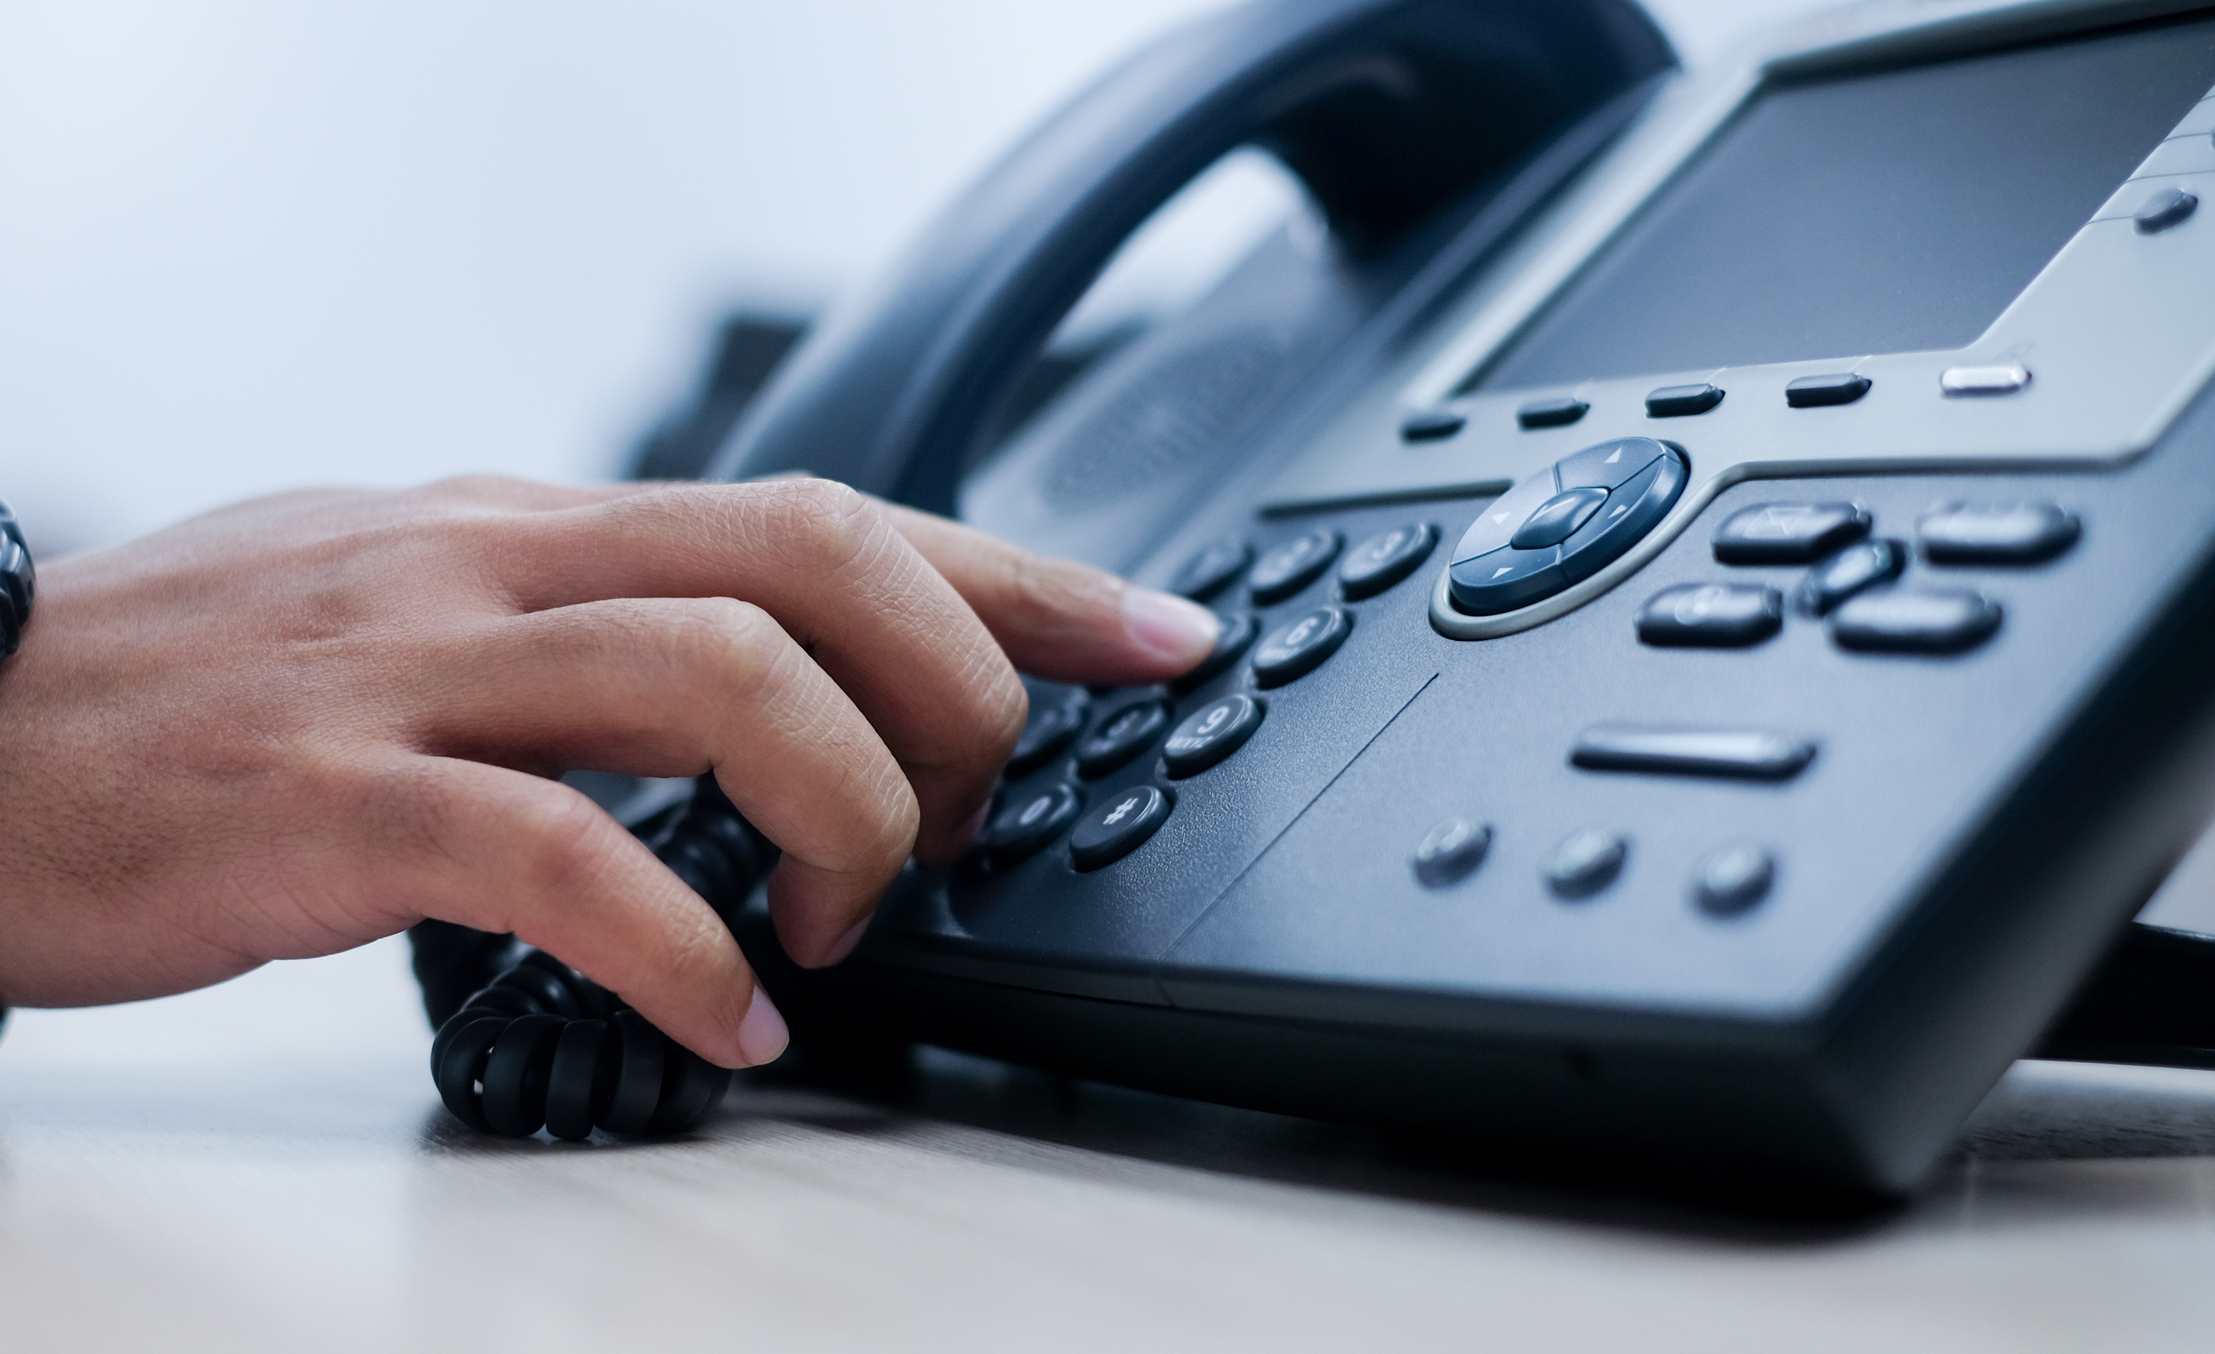 VoIP for Business: Why It Makes Sense - businessnewsdaily.com